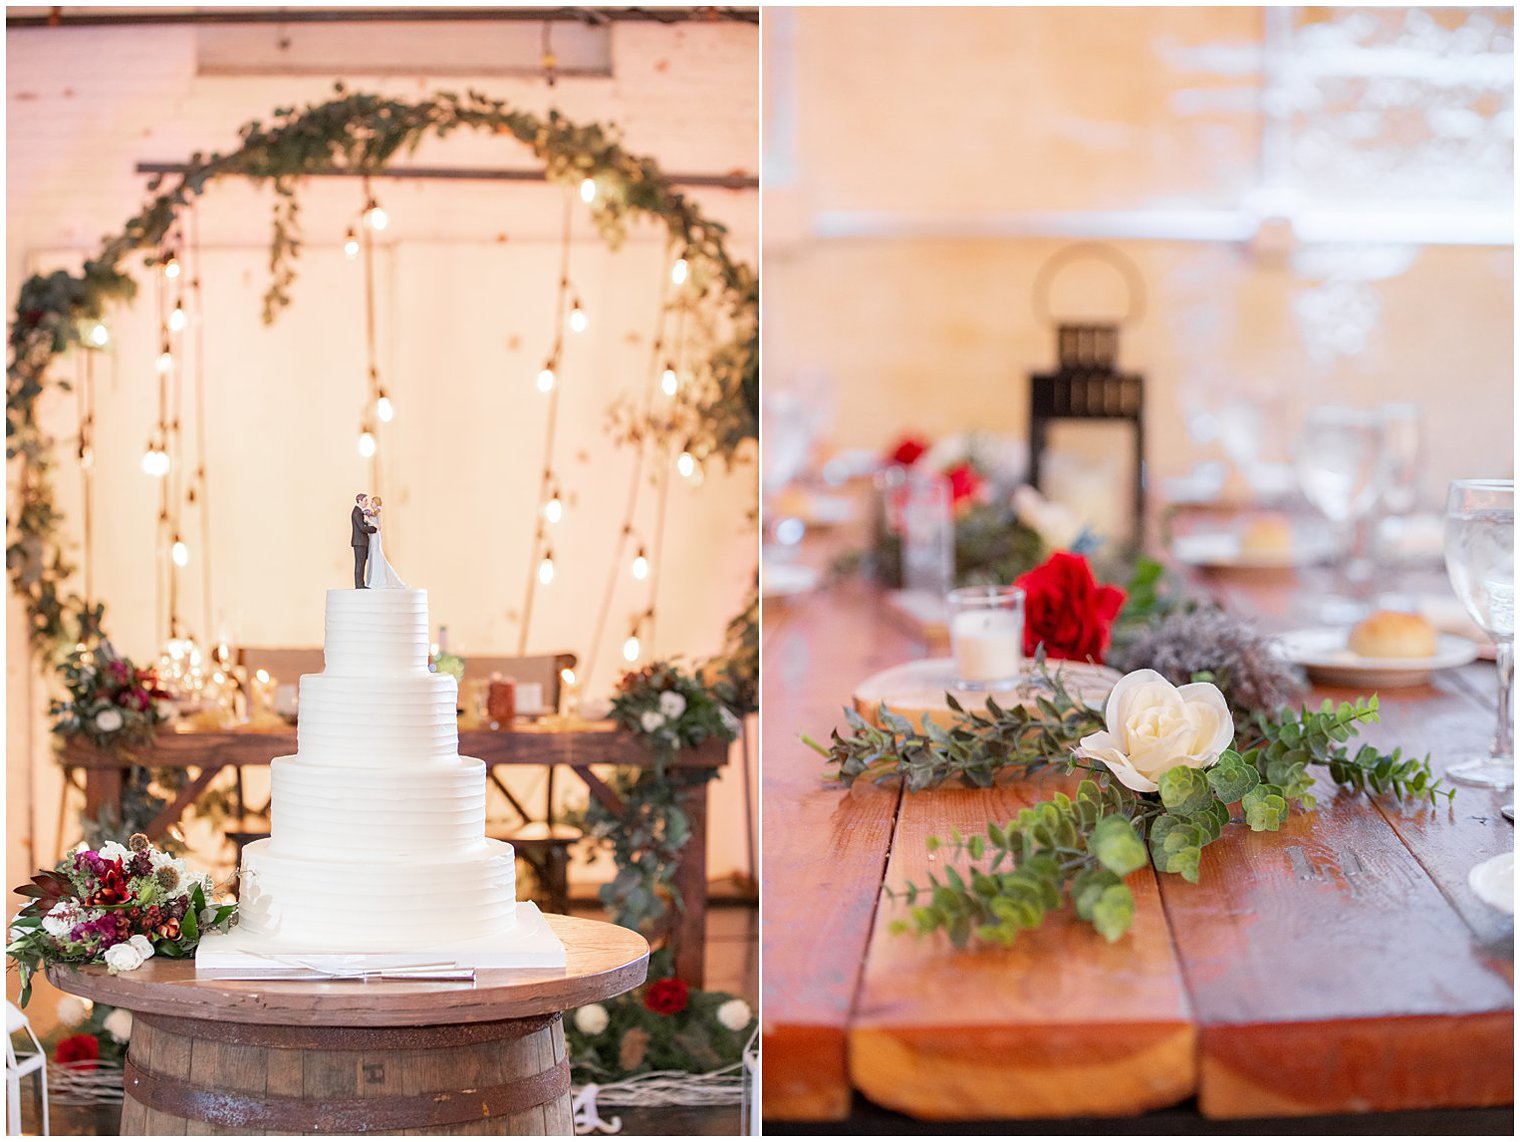 wedding cake and winter wedding reception table with florals 